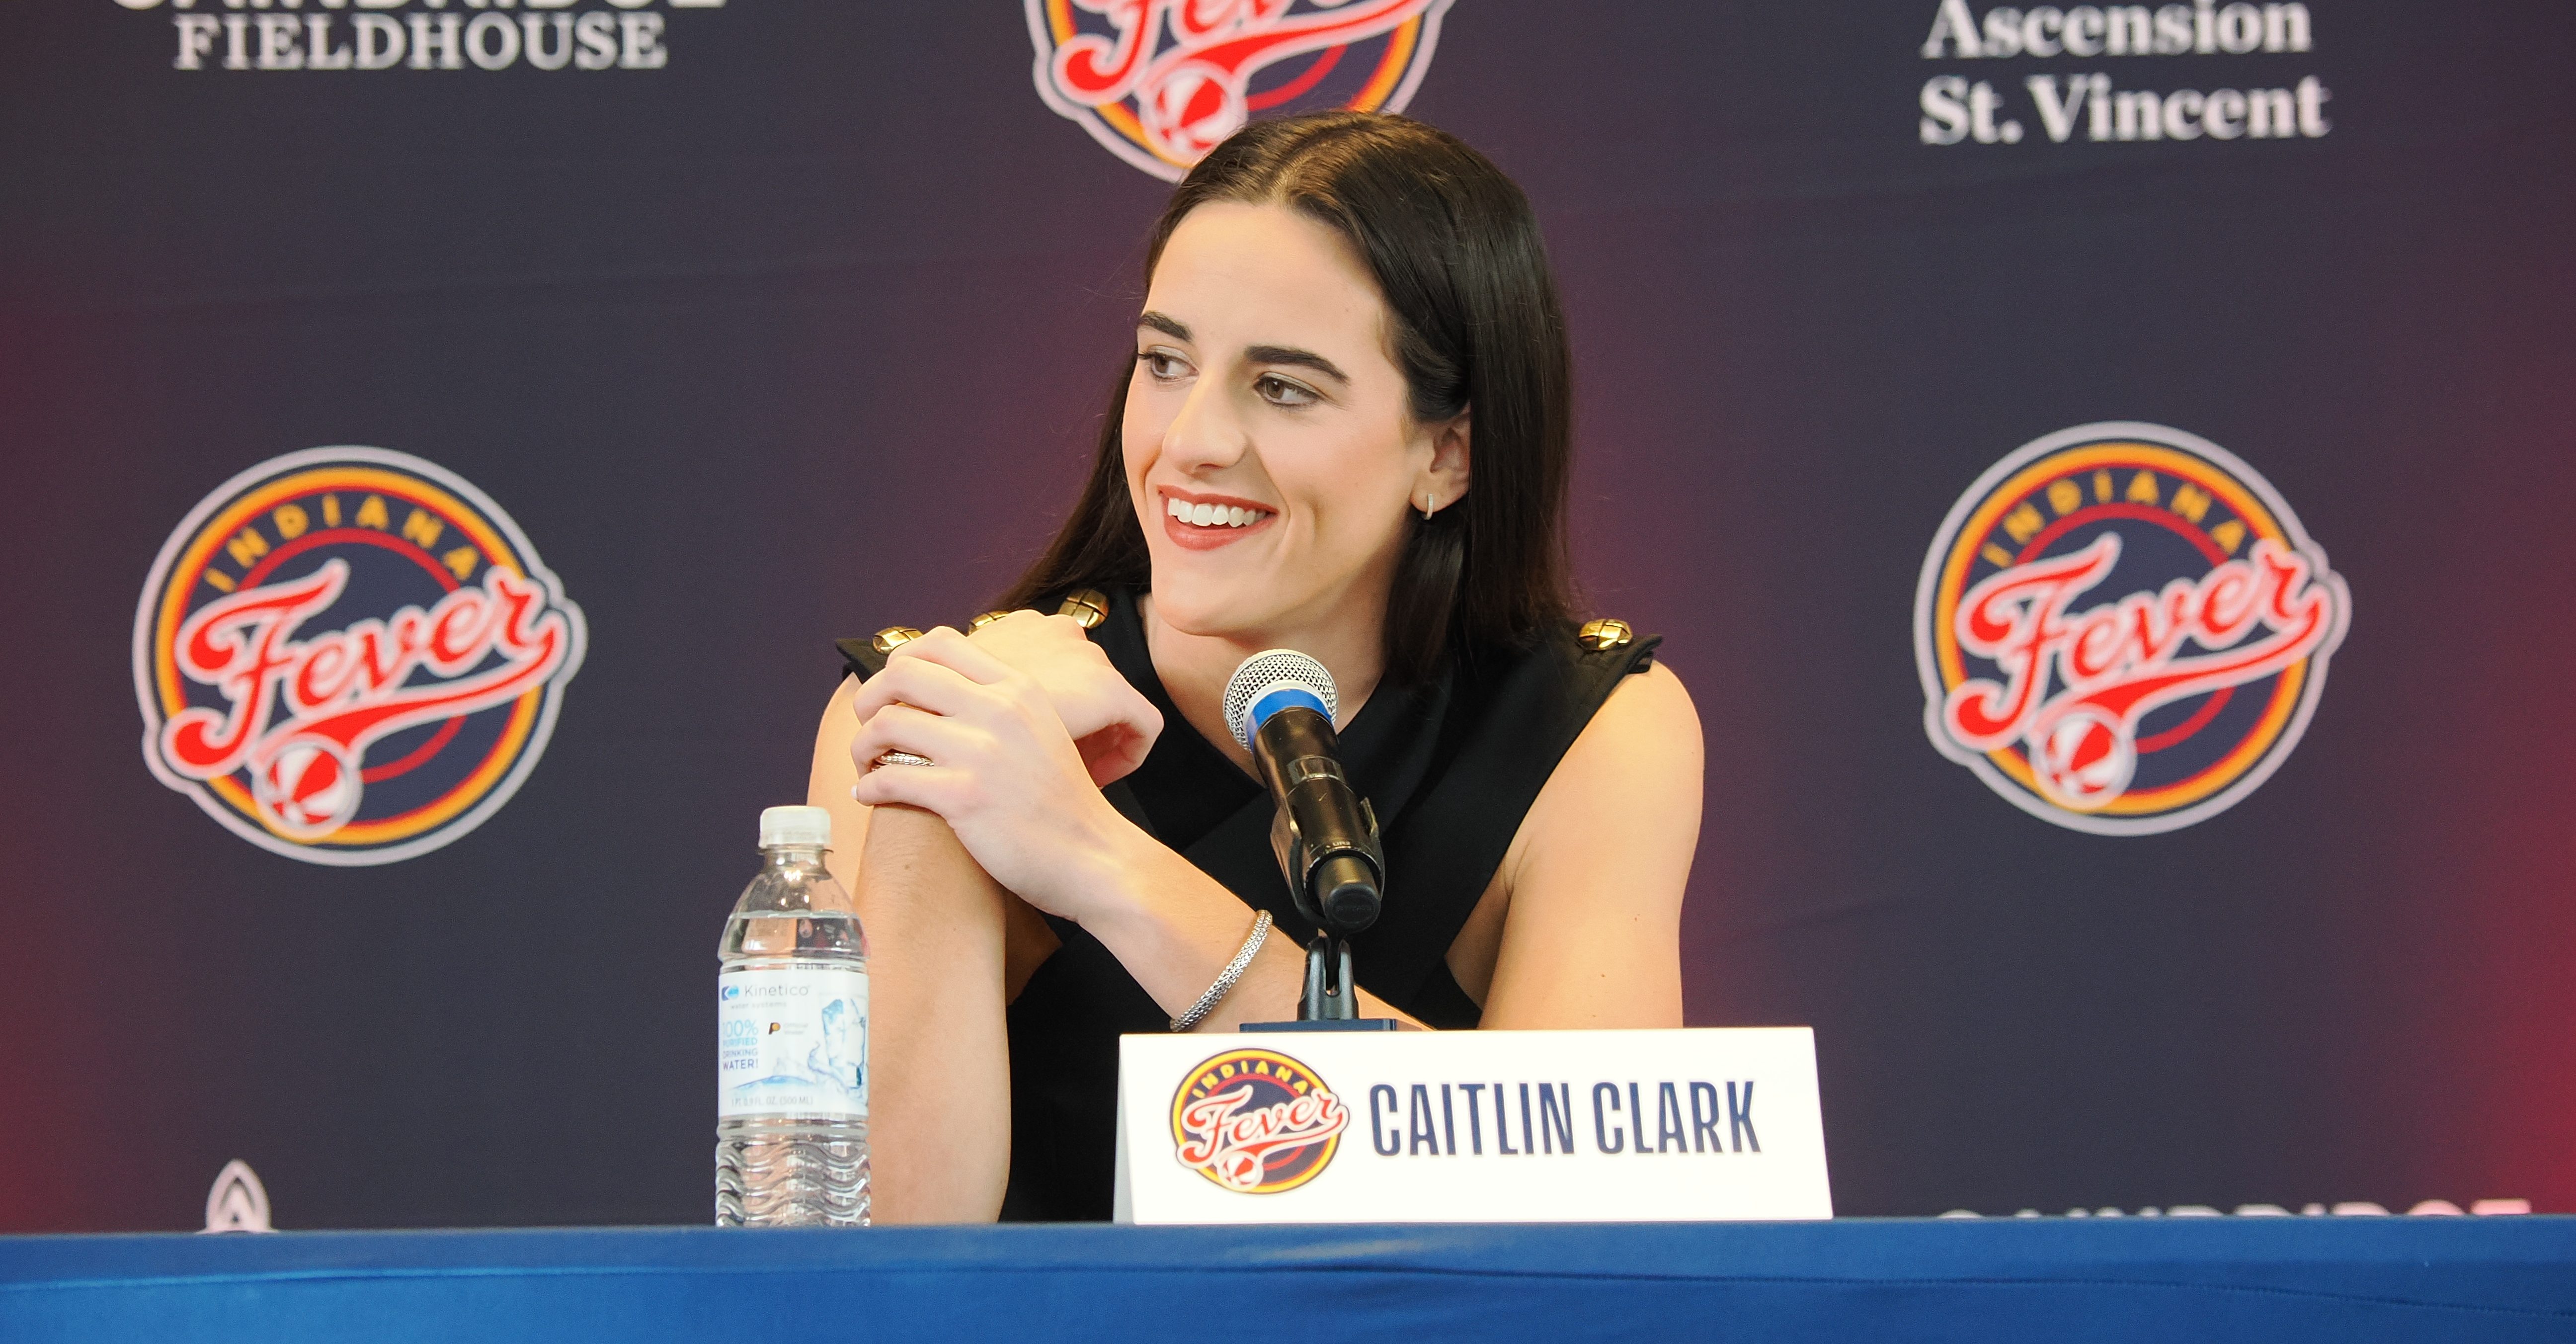 Caitlin Clark's early WNBA play will be tryout for spot on US Olympic
team